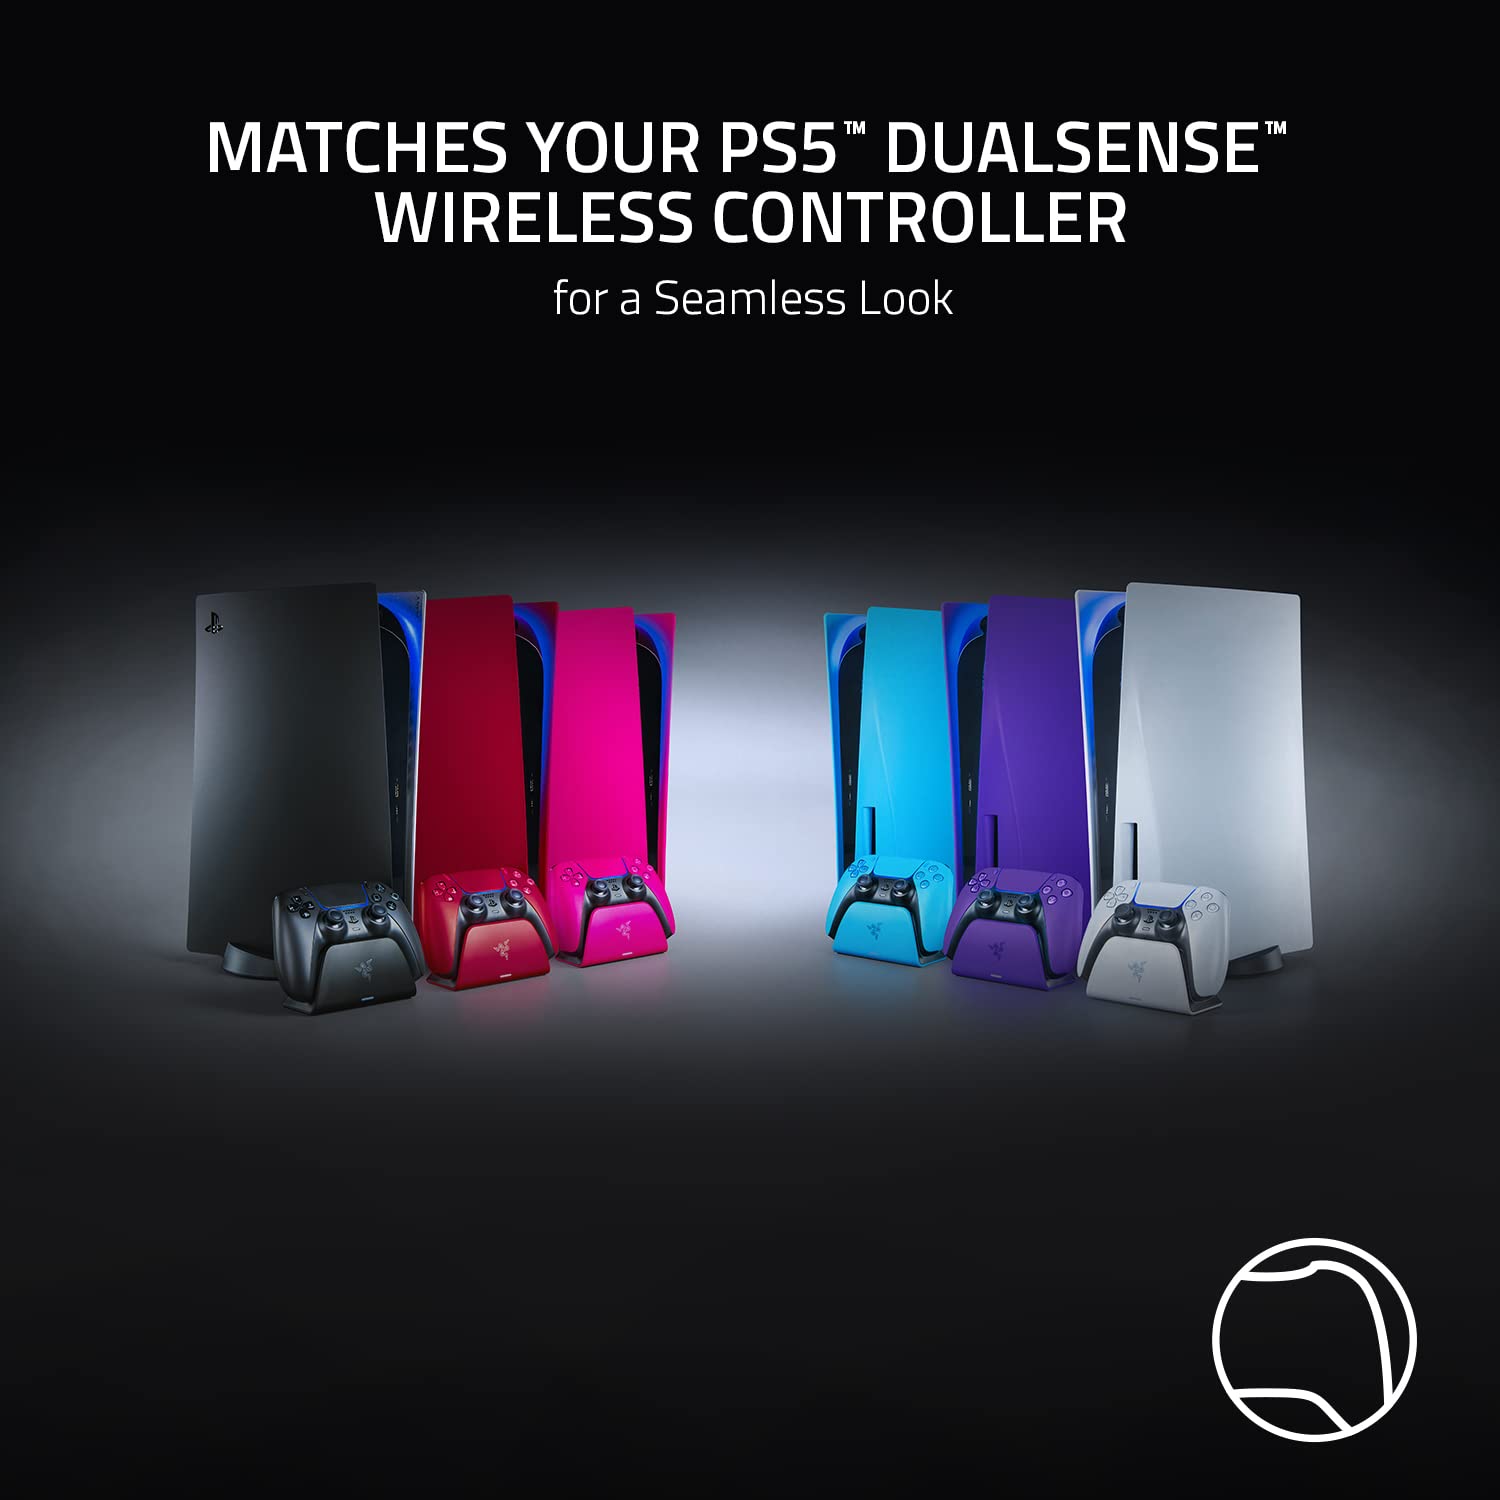 Razer Quick Charging Stand for PlayStation 5: Quick Charge - Curved Cradle Design - Matches PS5 DualSense Wireless Controller - One-Handed Navigation - USB Powered - Purple (Controller Sold Separately)